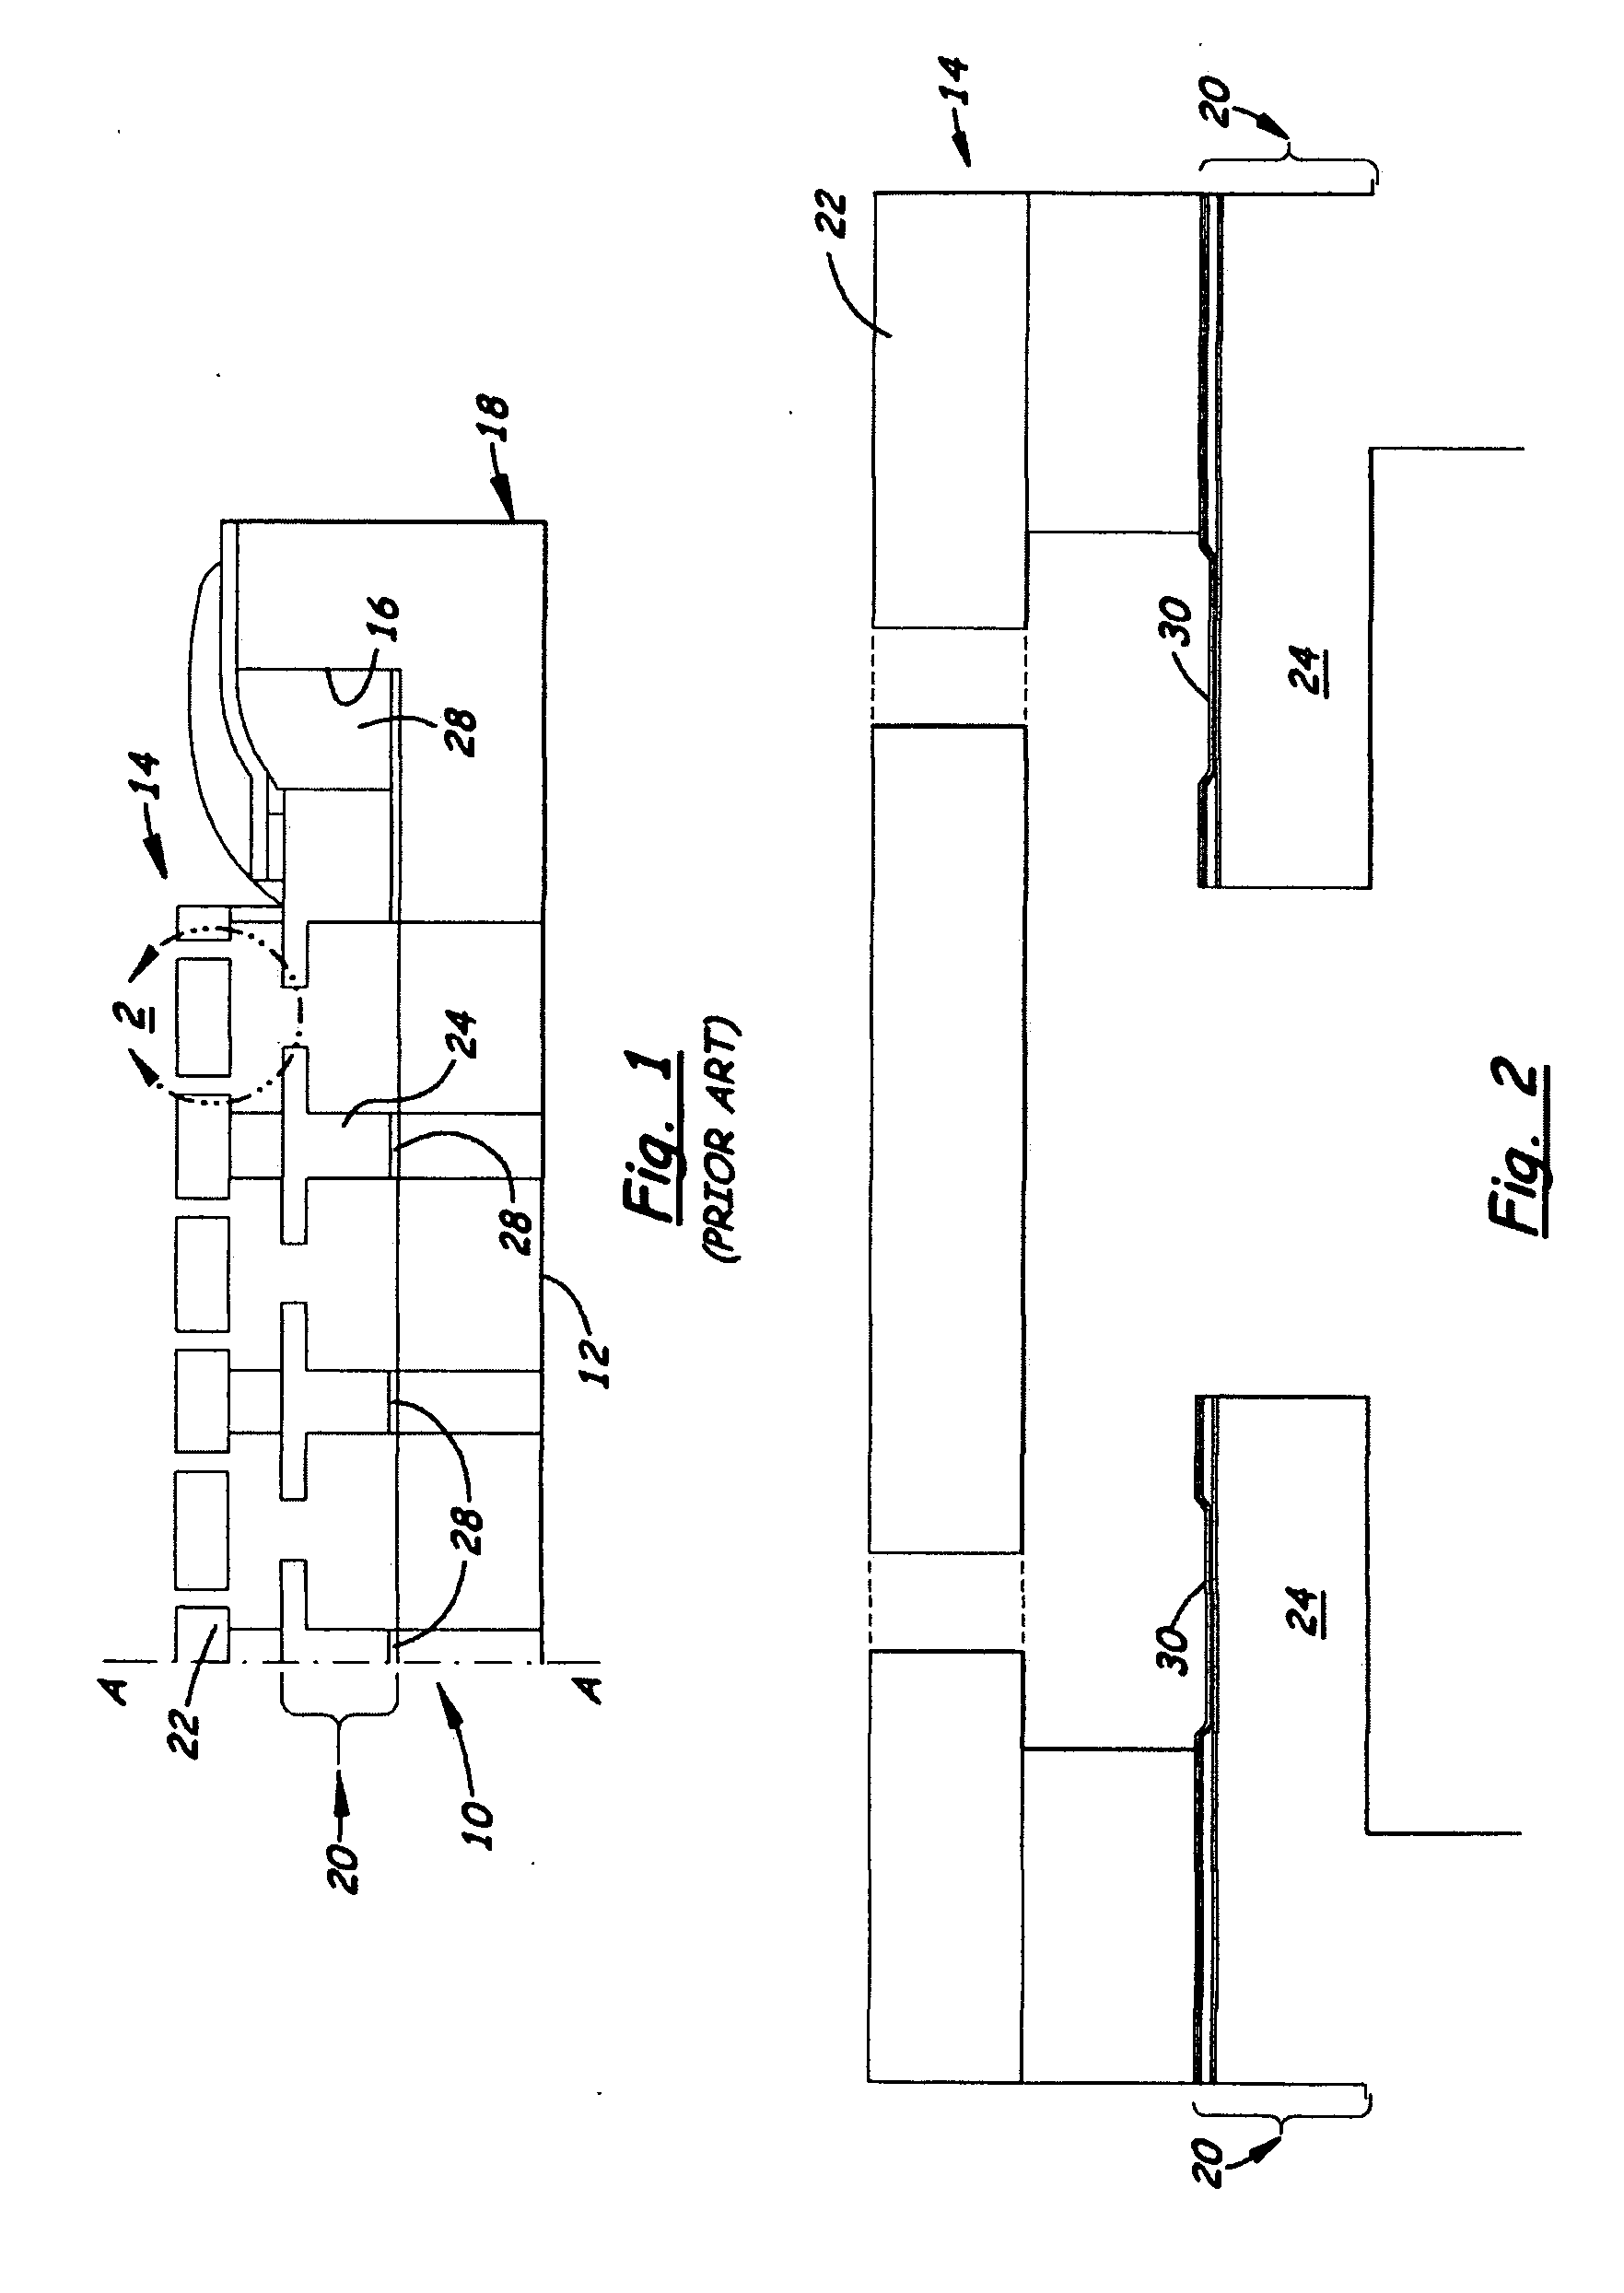 Heater chips with silicon die bonded on silicon substrate and methods of fabricating the heater chips